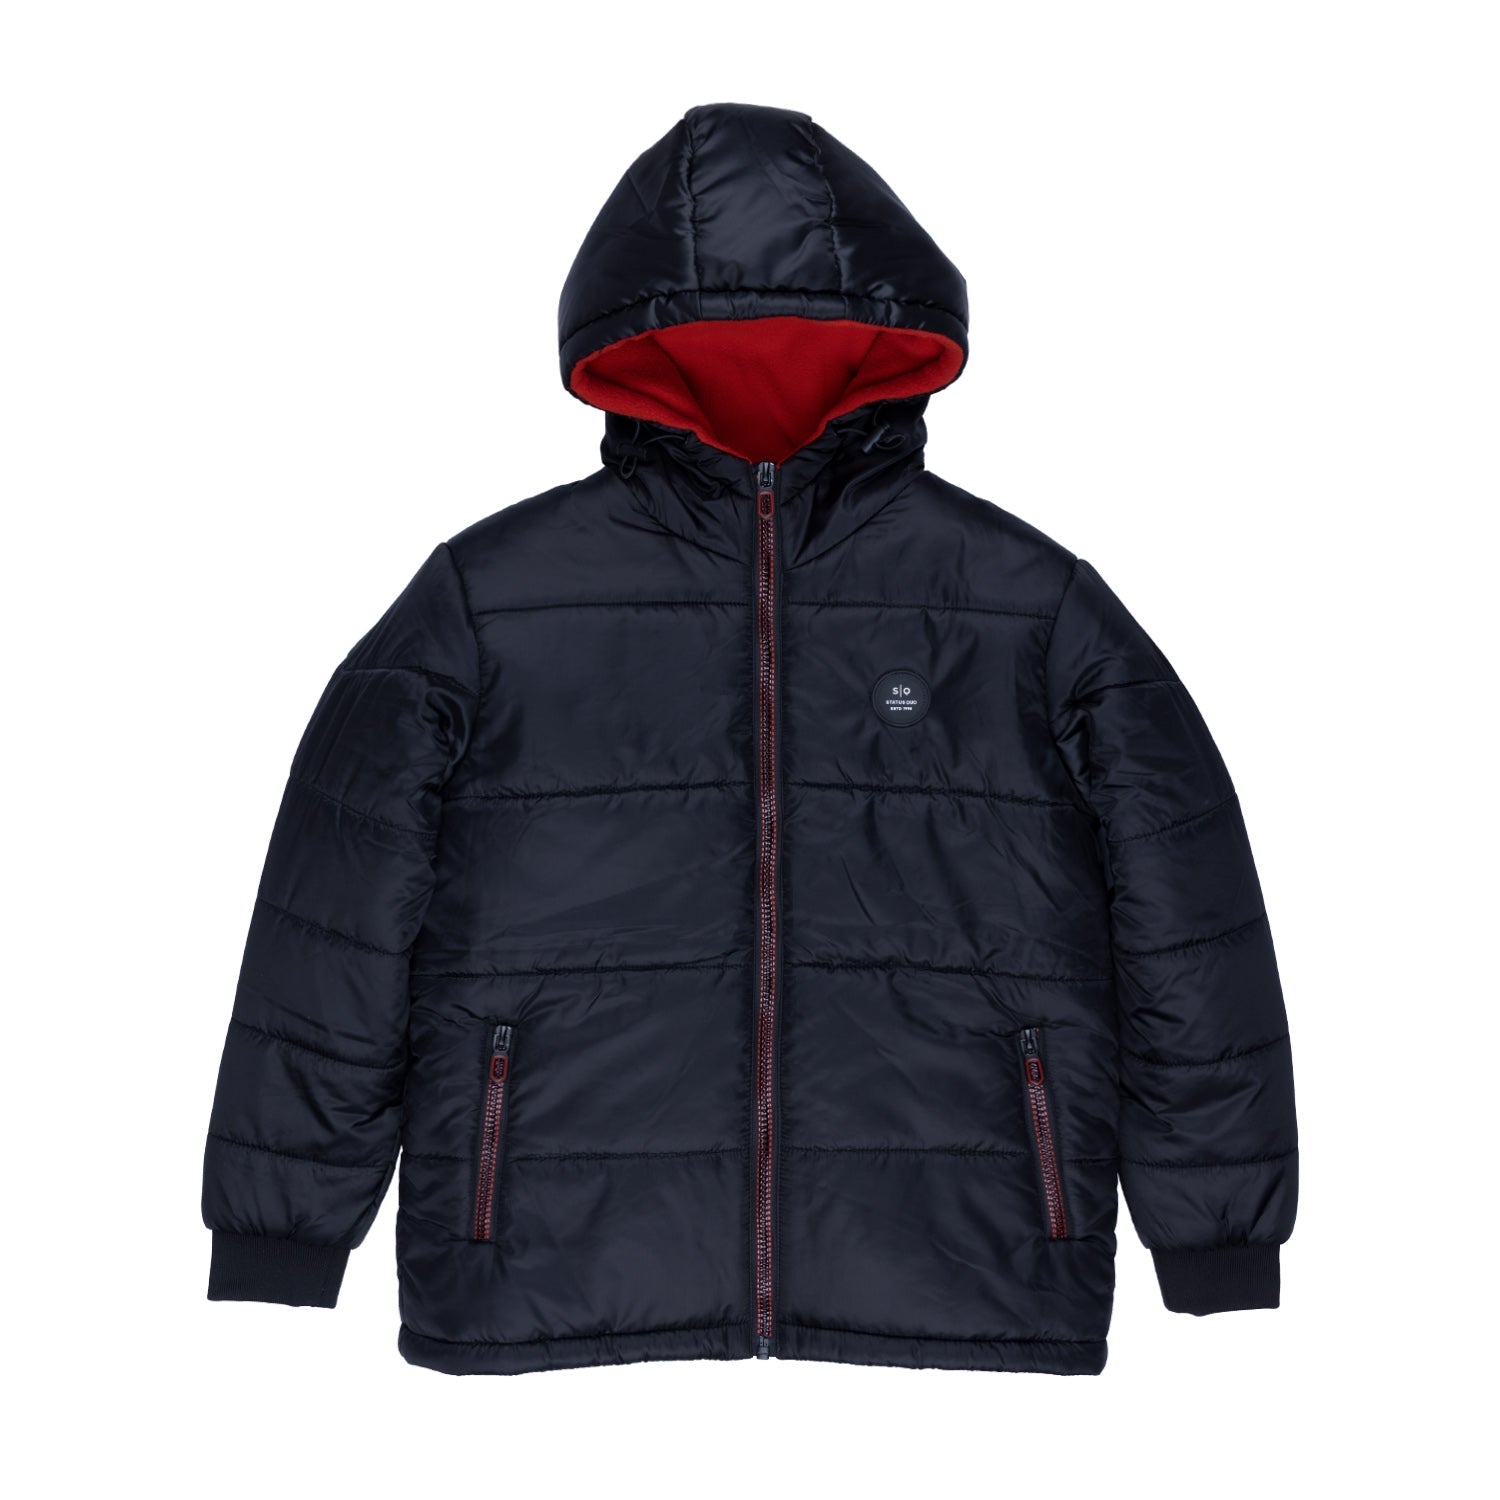 hooded jacket for boys